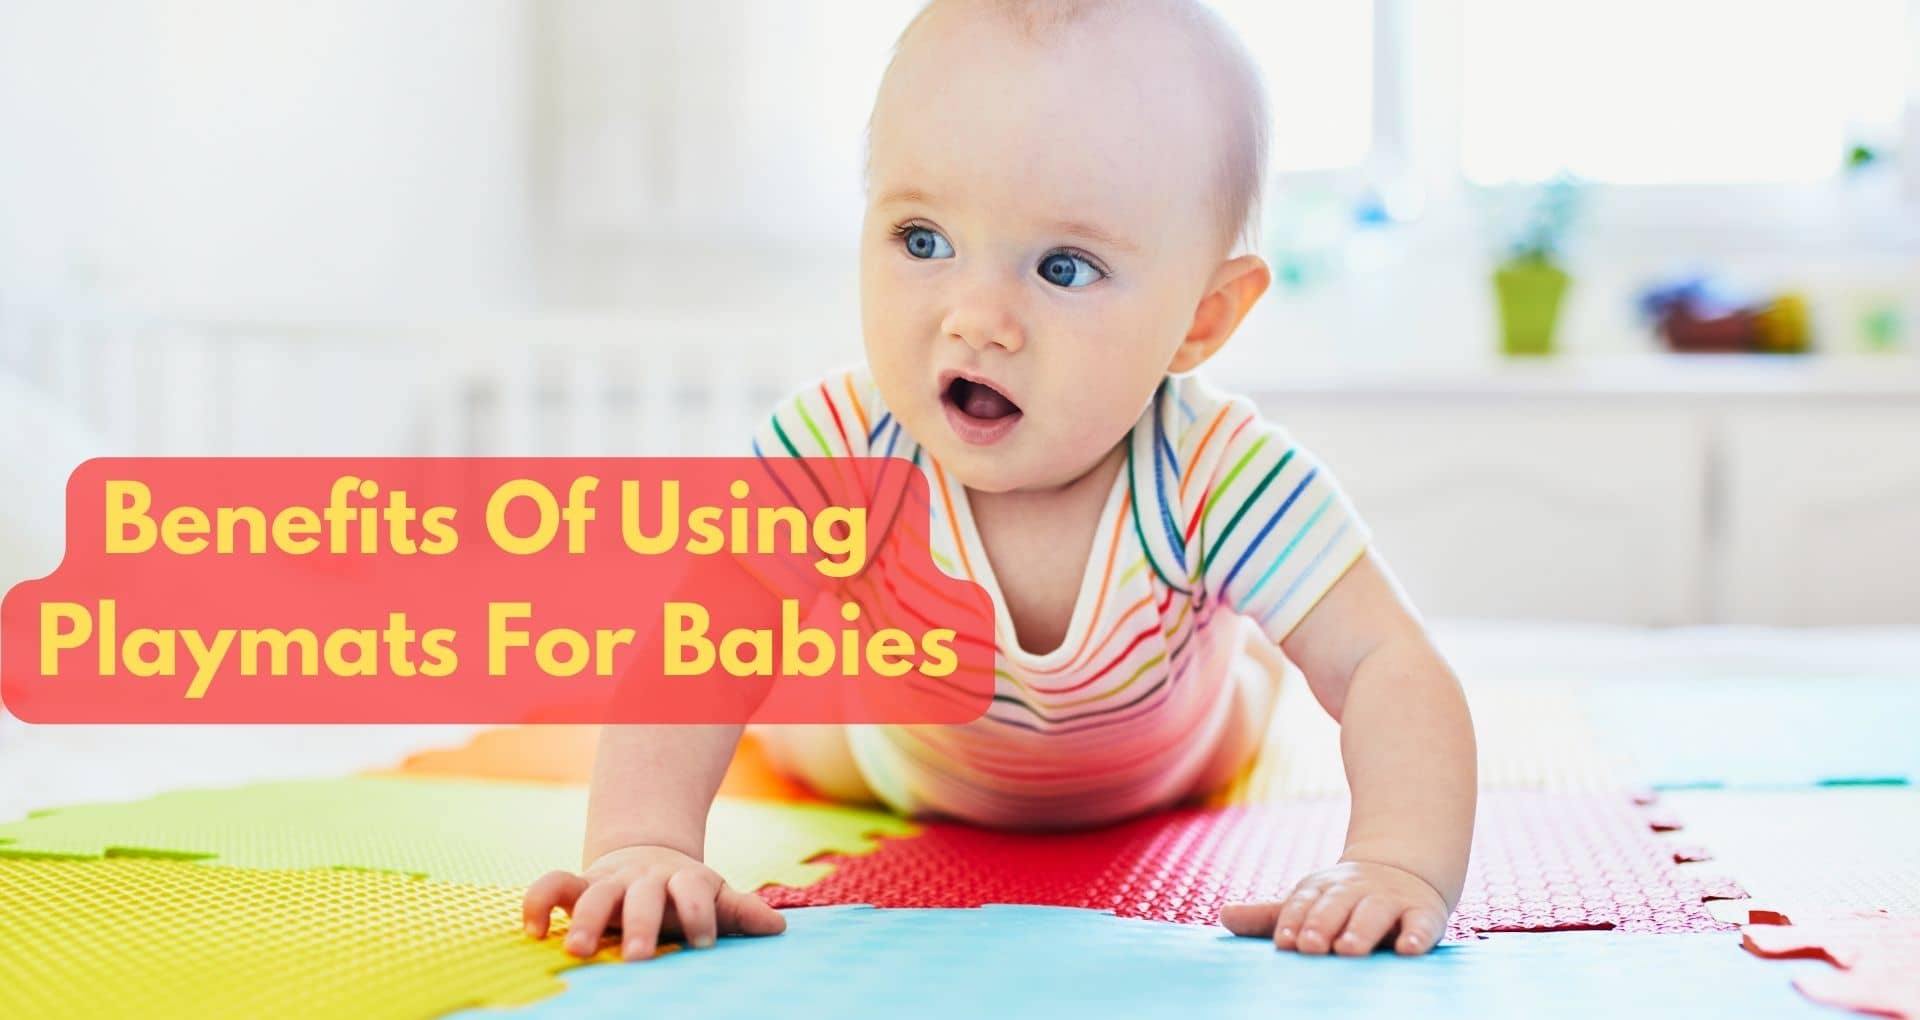 What Are The Benefits Of Using Playmats For Babies?